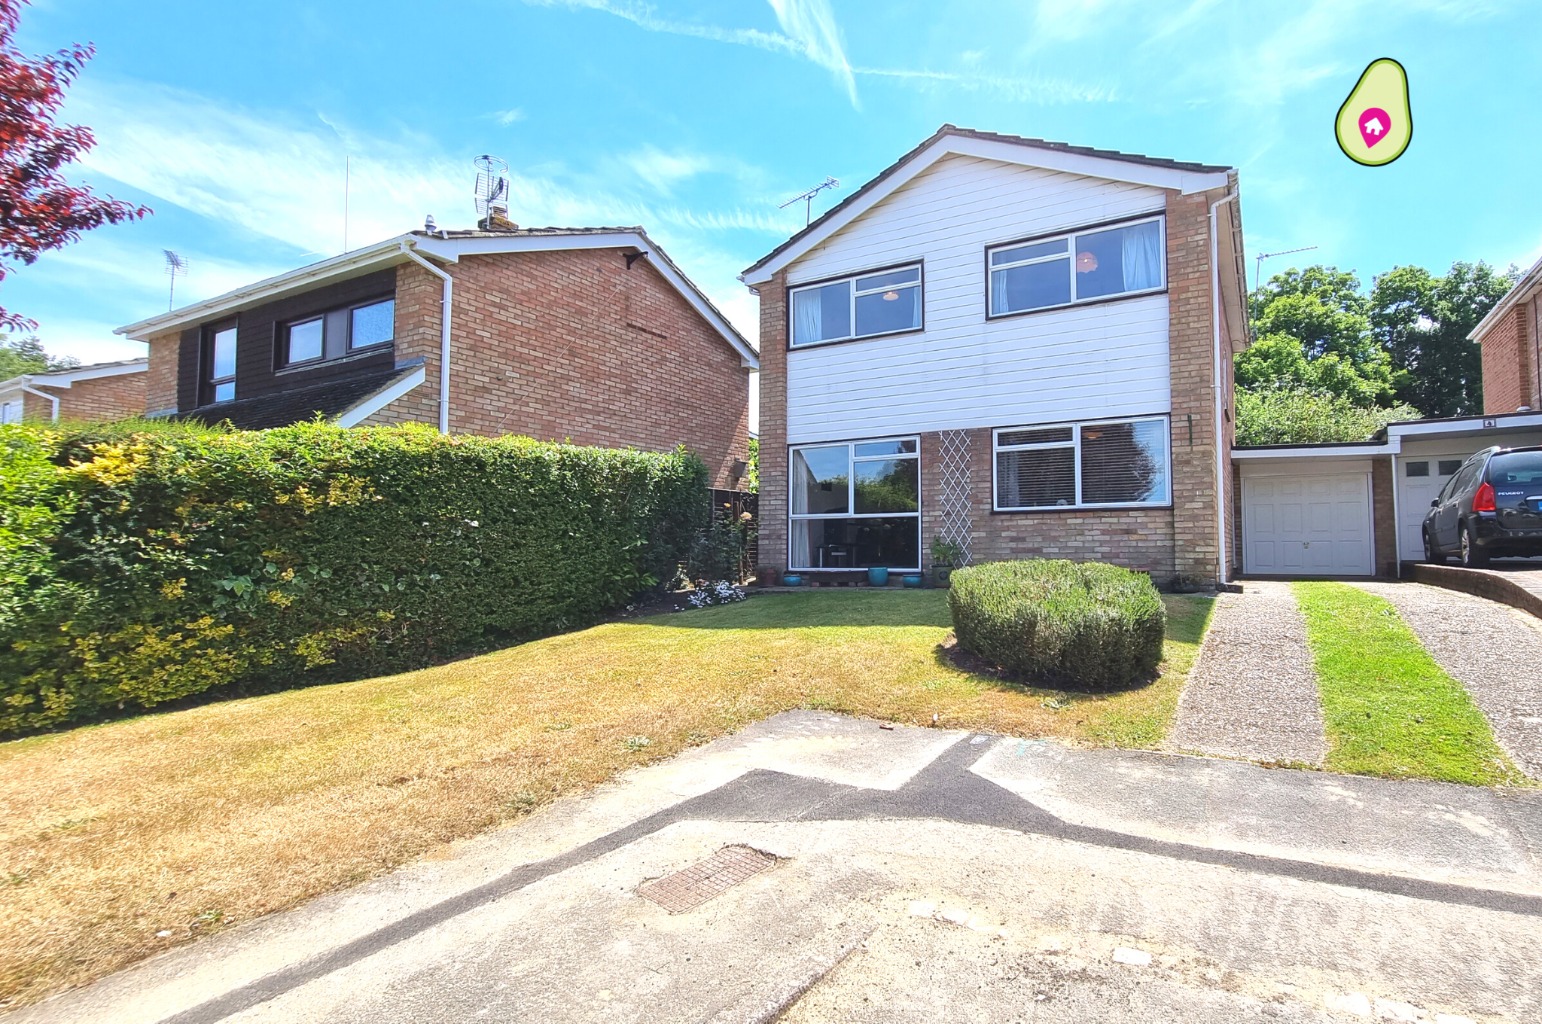 This is a wonderful property which has never ben for sale since new. This home offers plenty of potential whilst being a great size and having a beautiful private rear garden